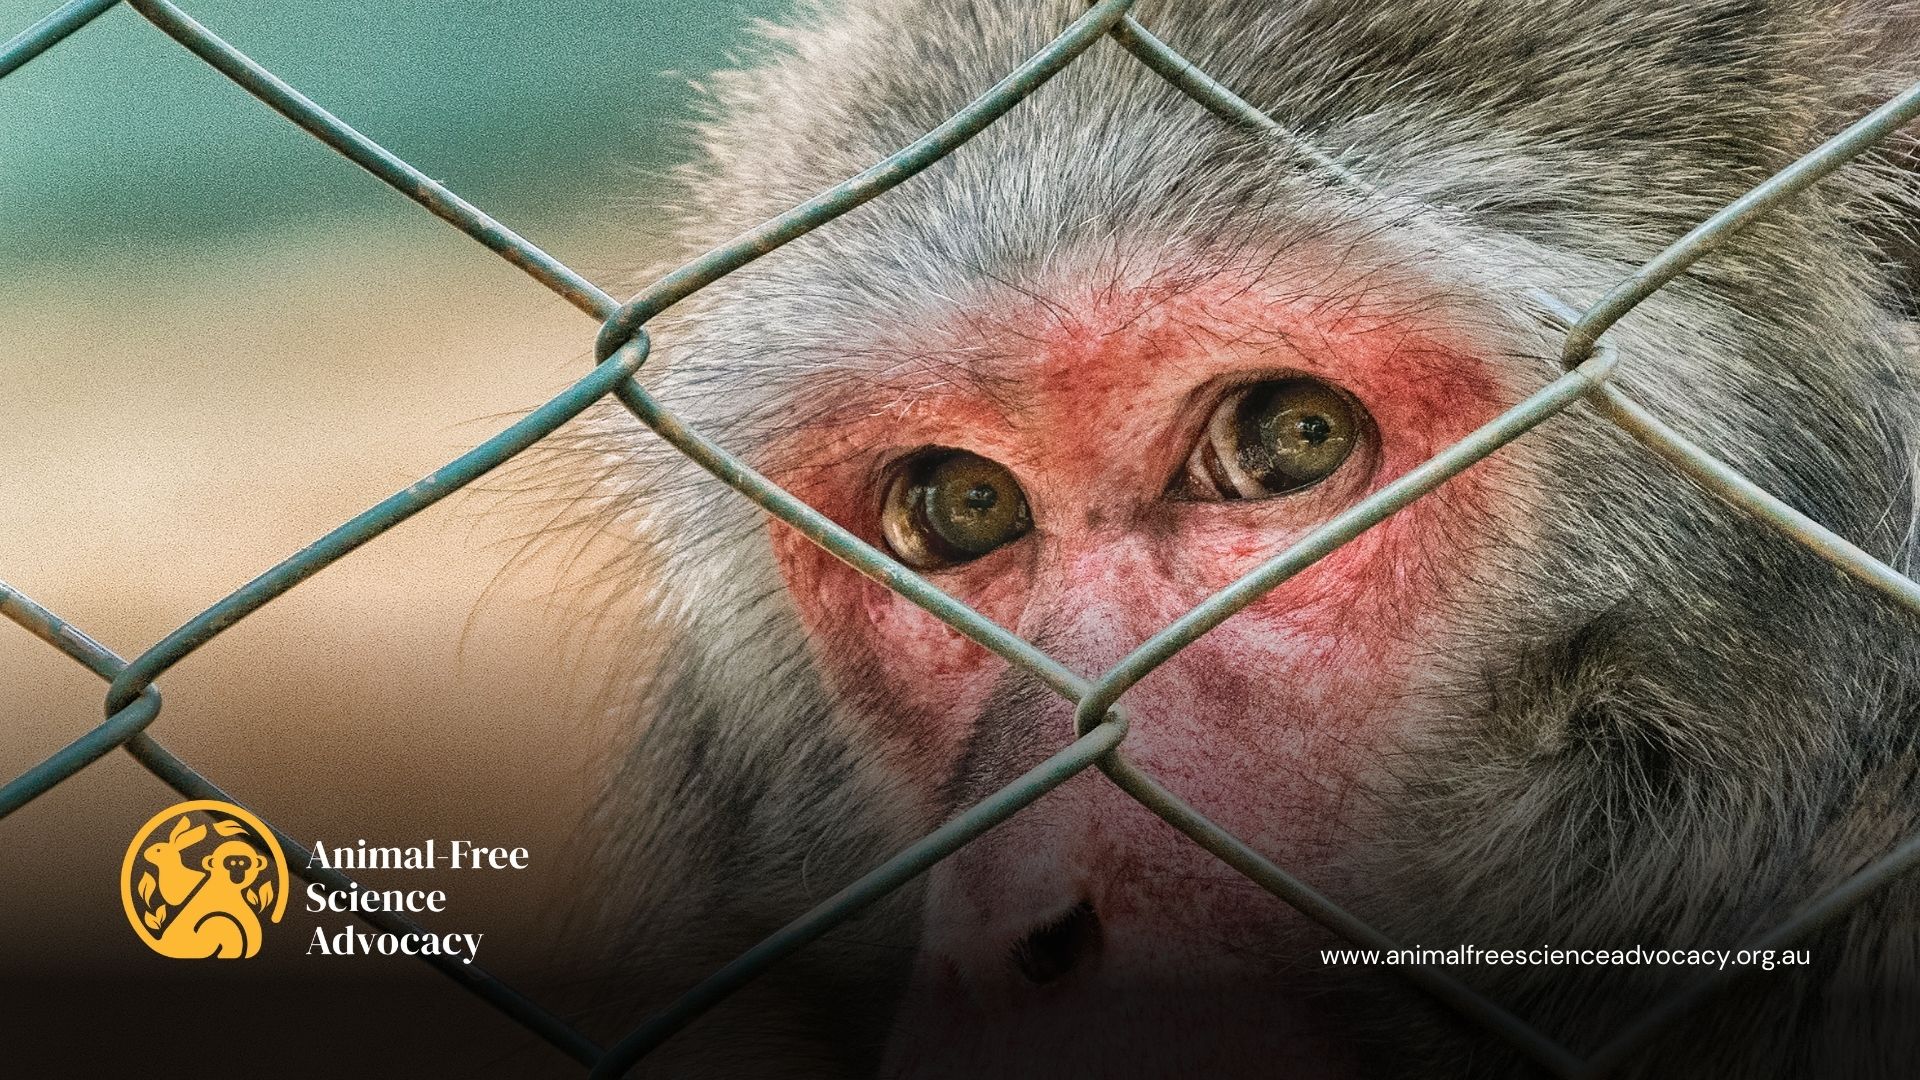 Macaque stares warily from behind a barbed wire fence in a research facility